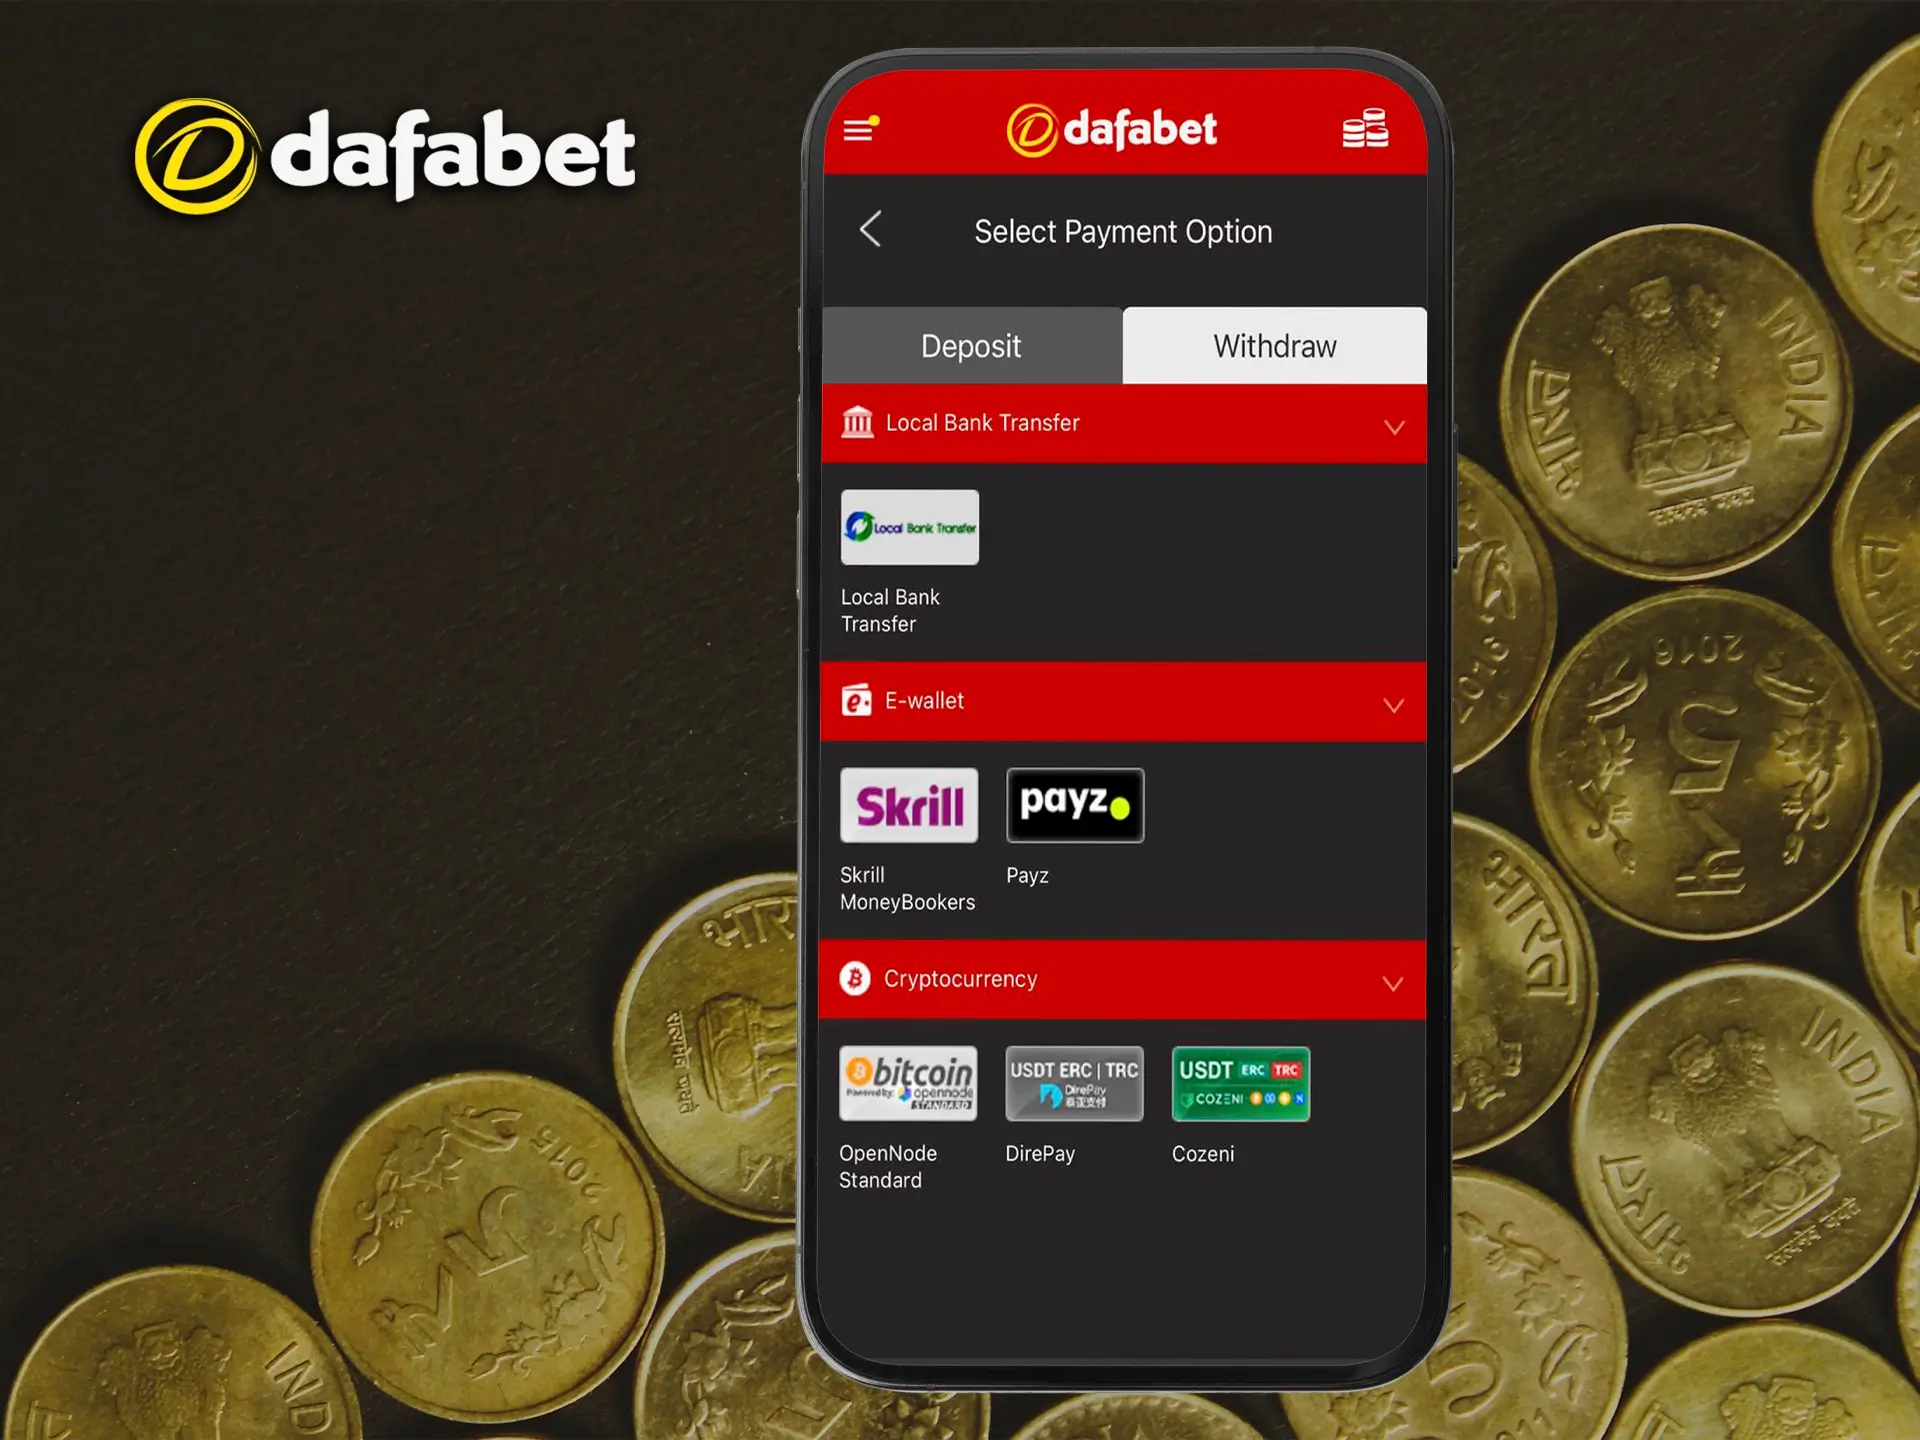 Dafabet is favoured by users due to its innovative withdrawal system.